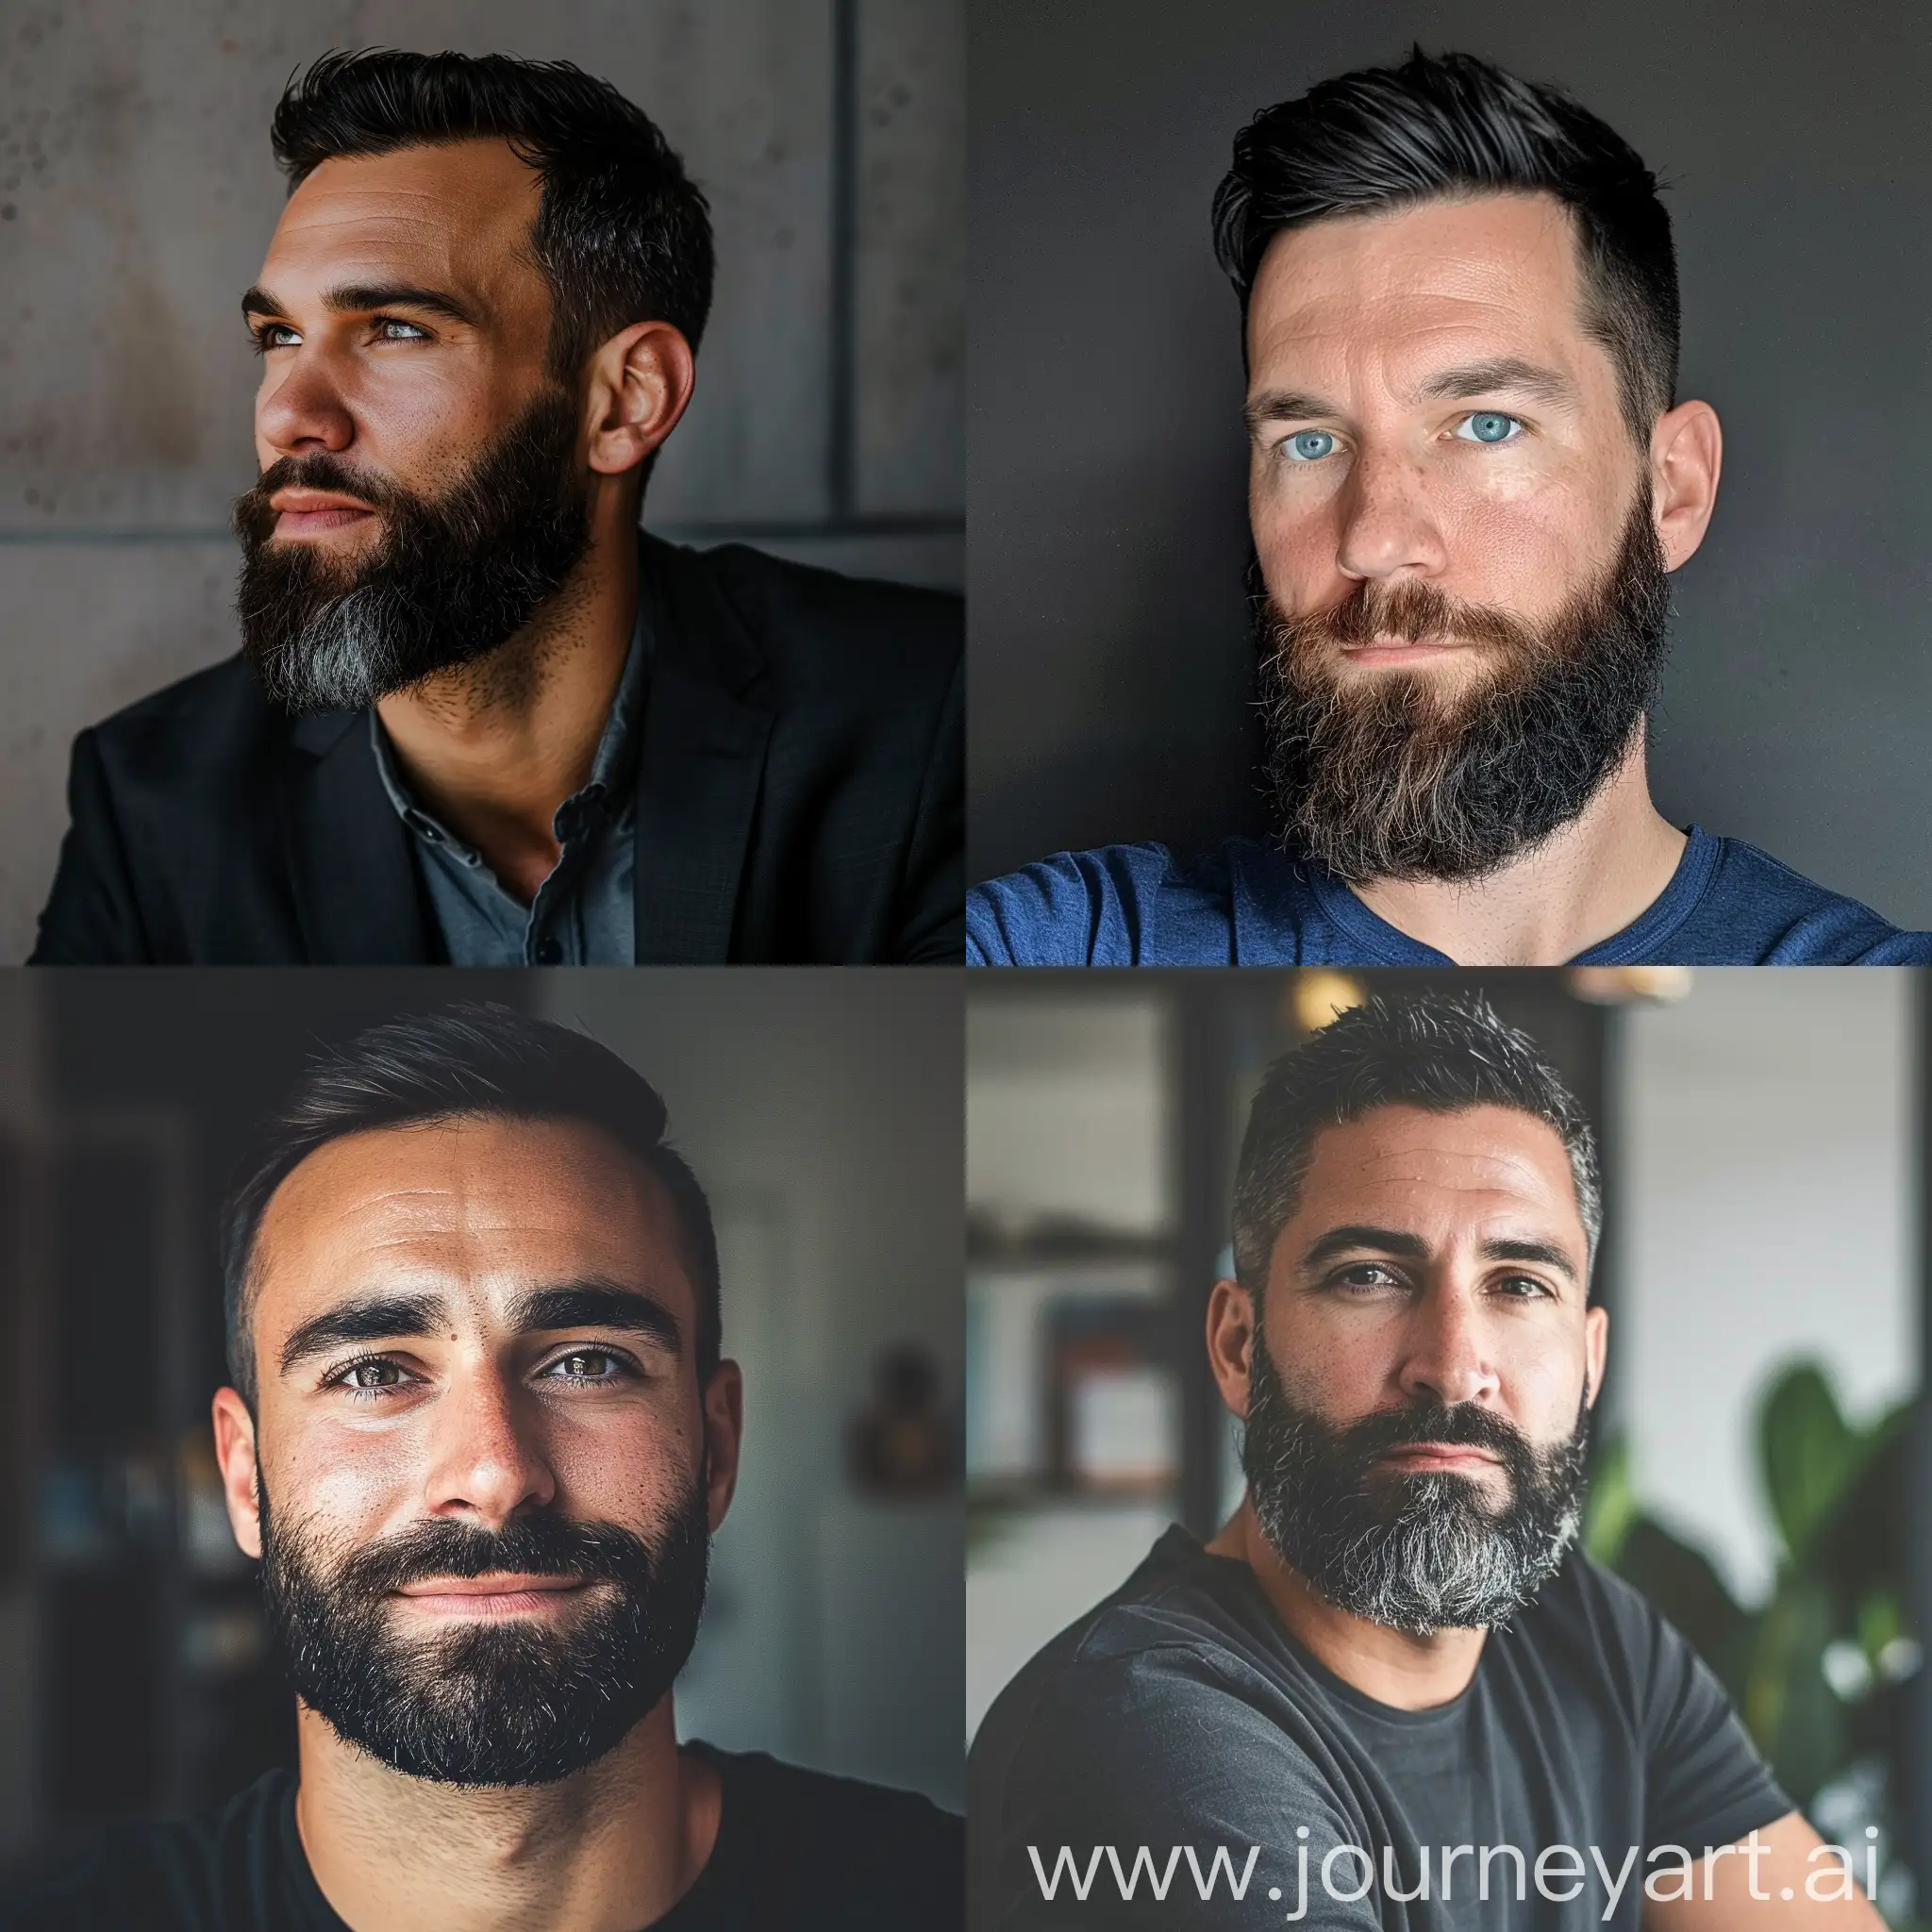 Digital-Marketing-Manager-LinkedIn-Profile-Picture-Confident-Mid30s-Male-with-Short-Black-Beard